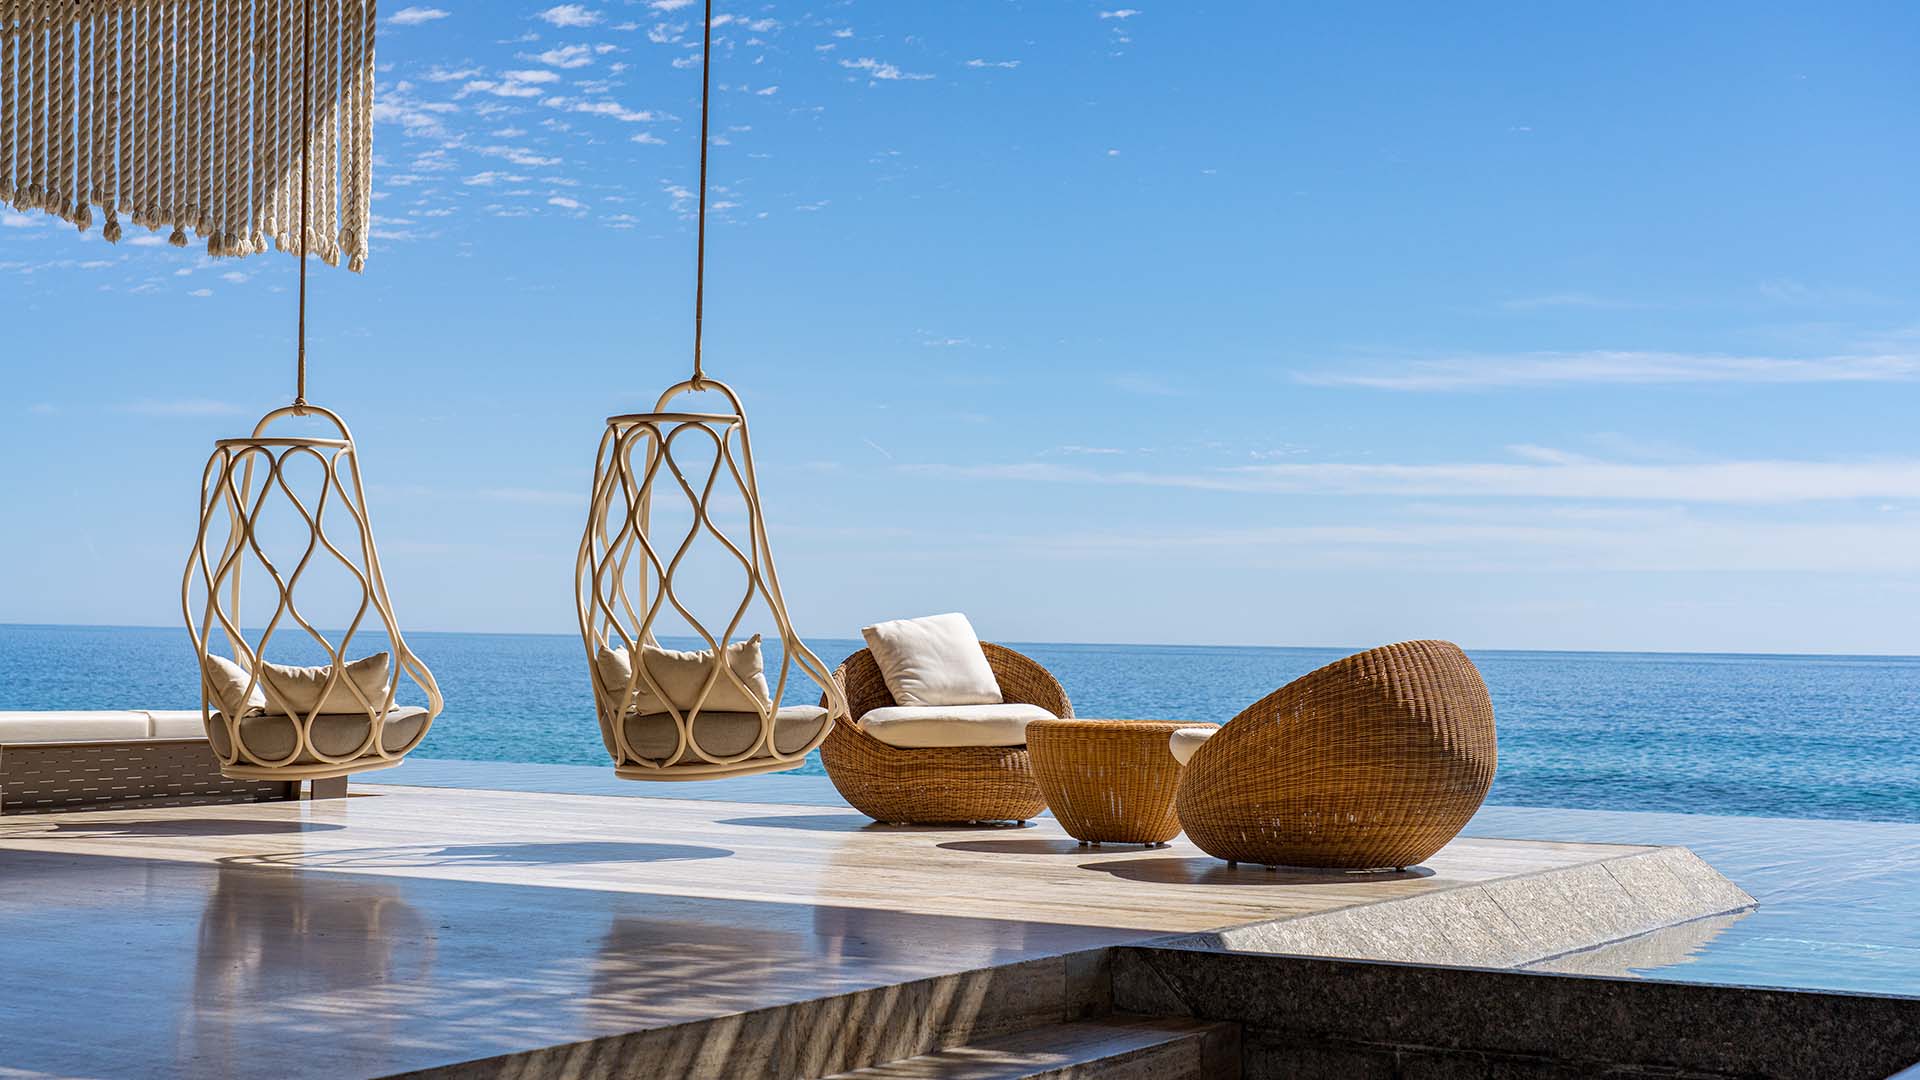 Seating area overlooking the water at Solaz, a Luxury Collection Resort, Los Cabos.